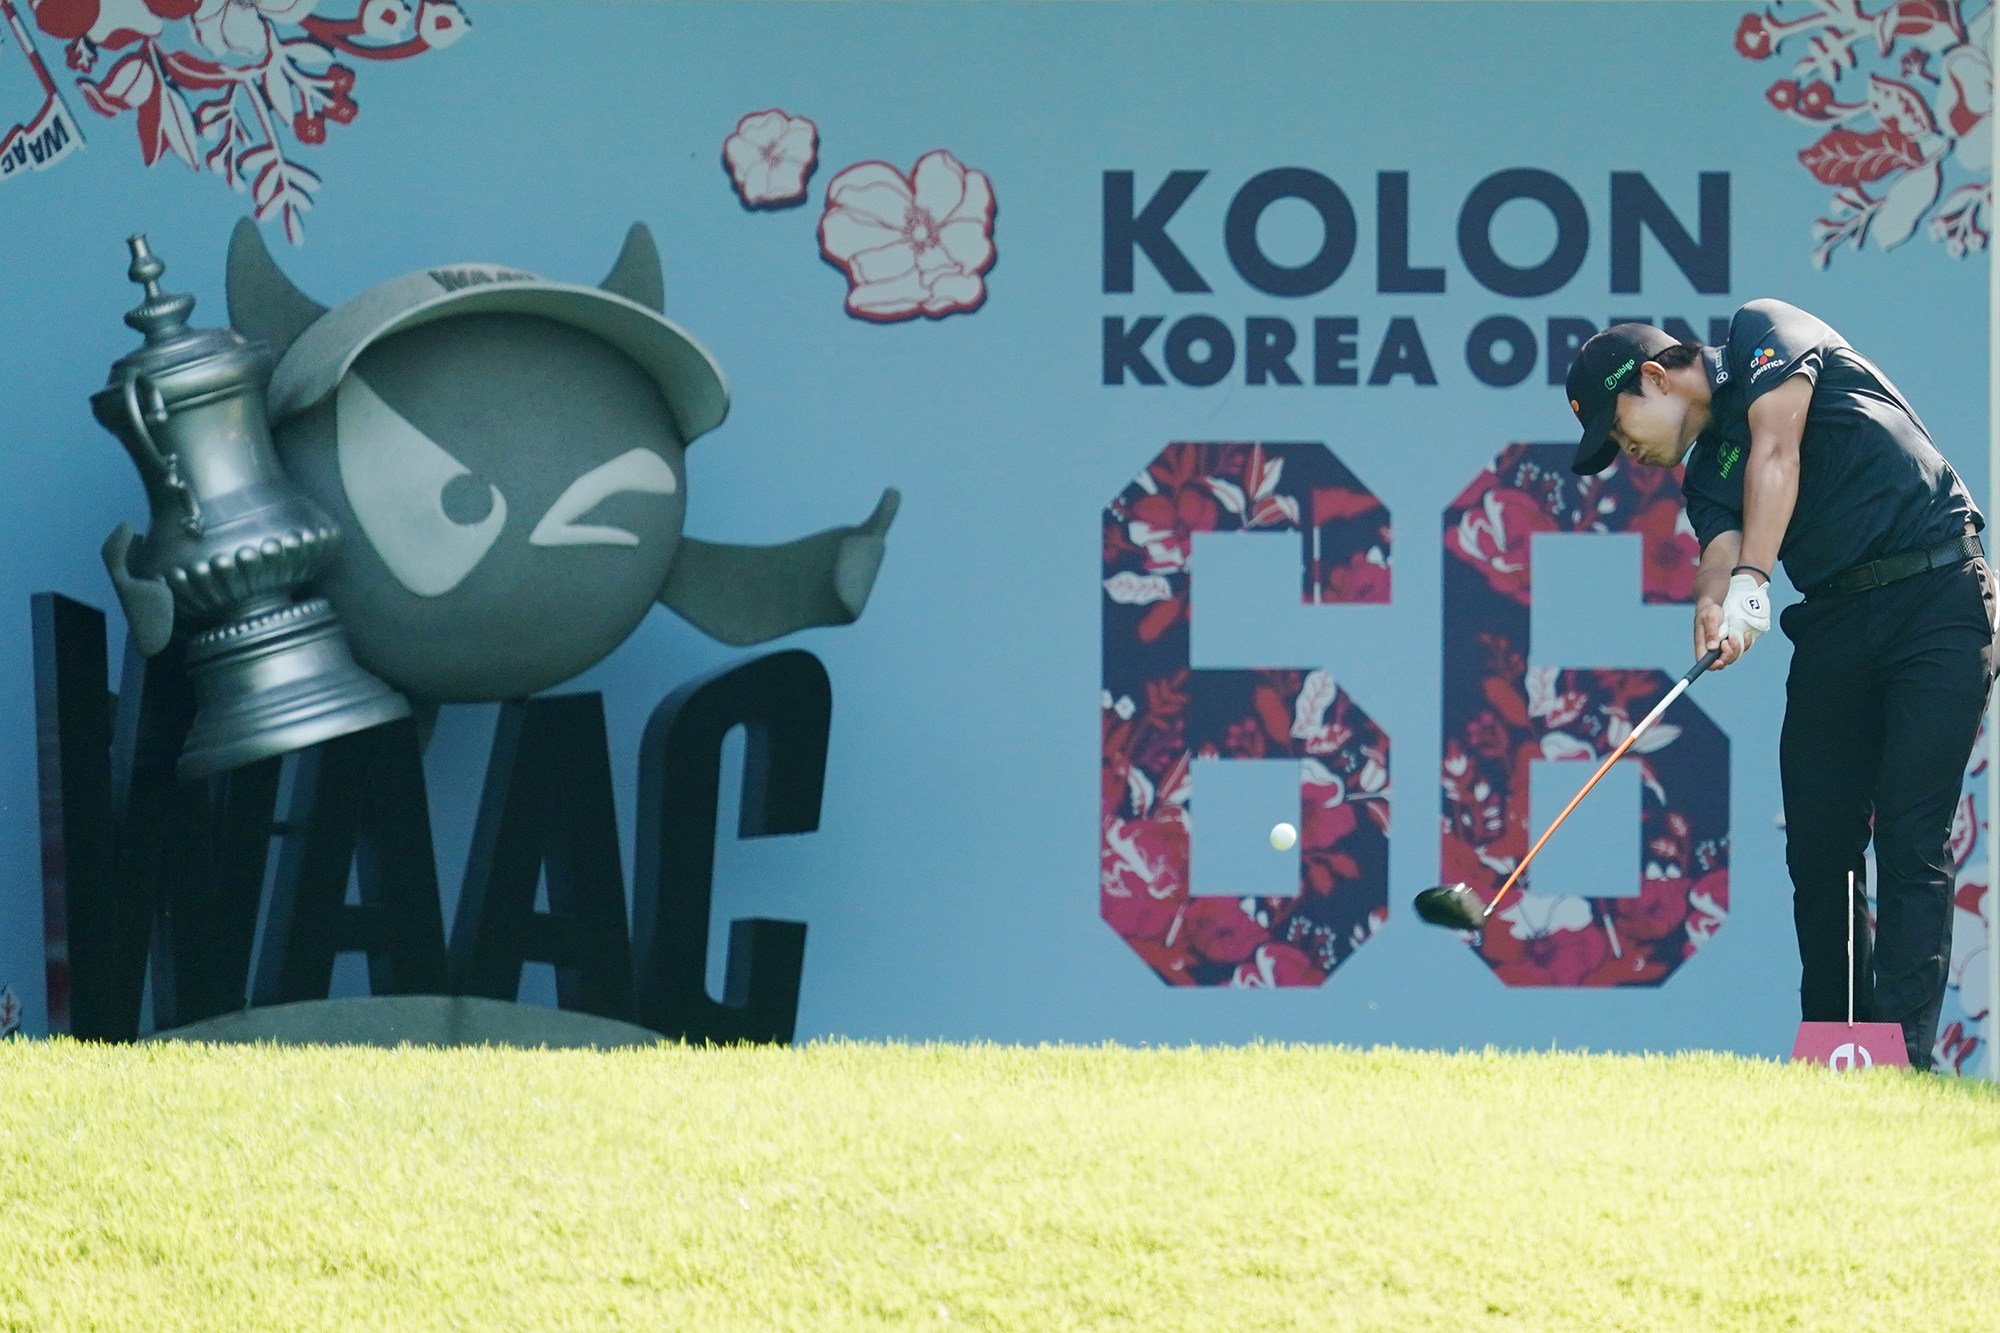 Kim Min-kyu Kim in action during the Kolon Korea Open, which is co-sanctioned by the Asian Tour. Photo: KGA